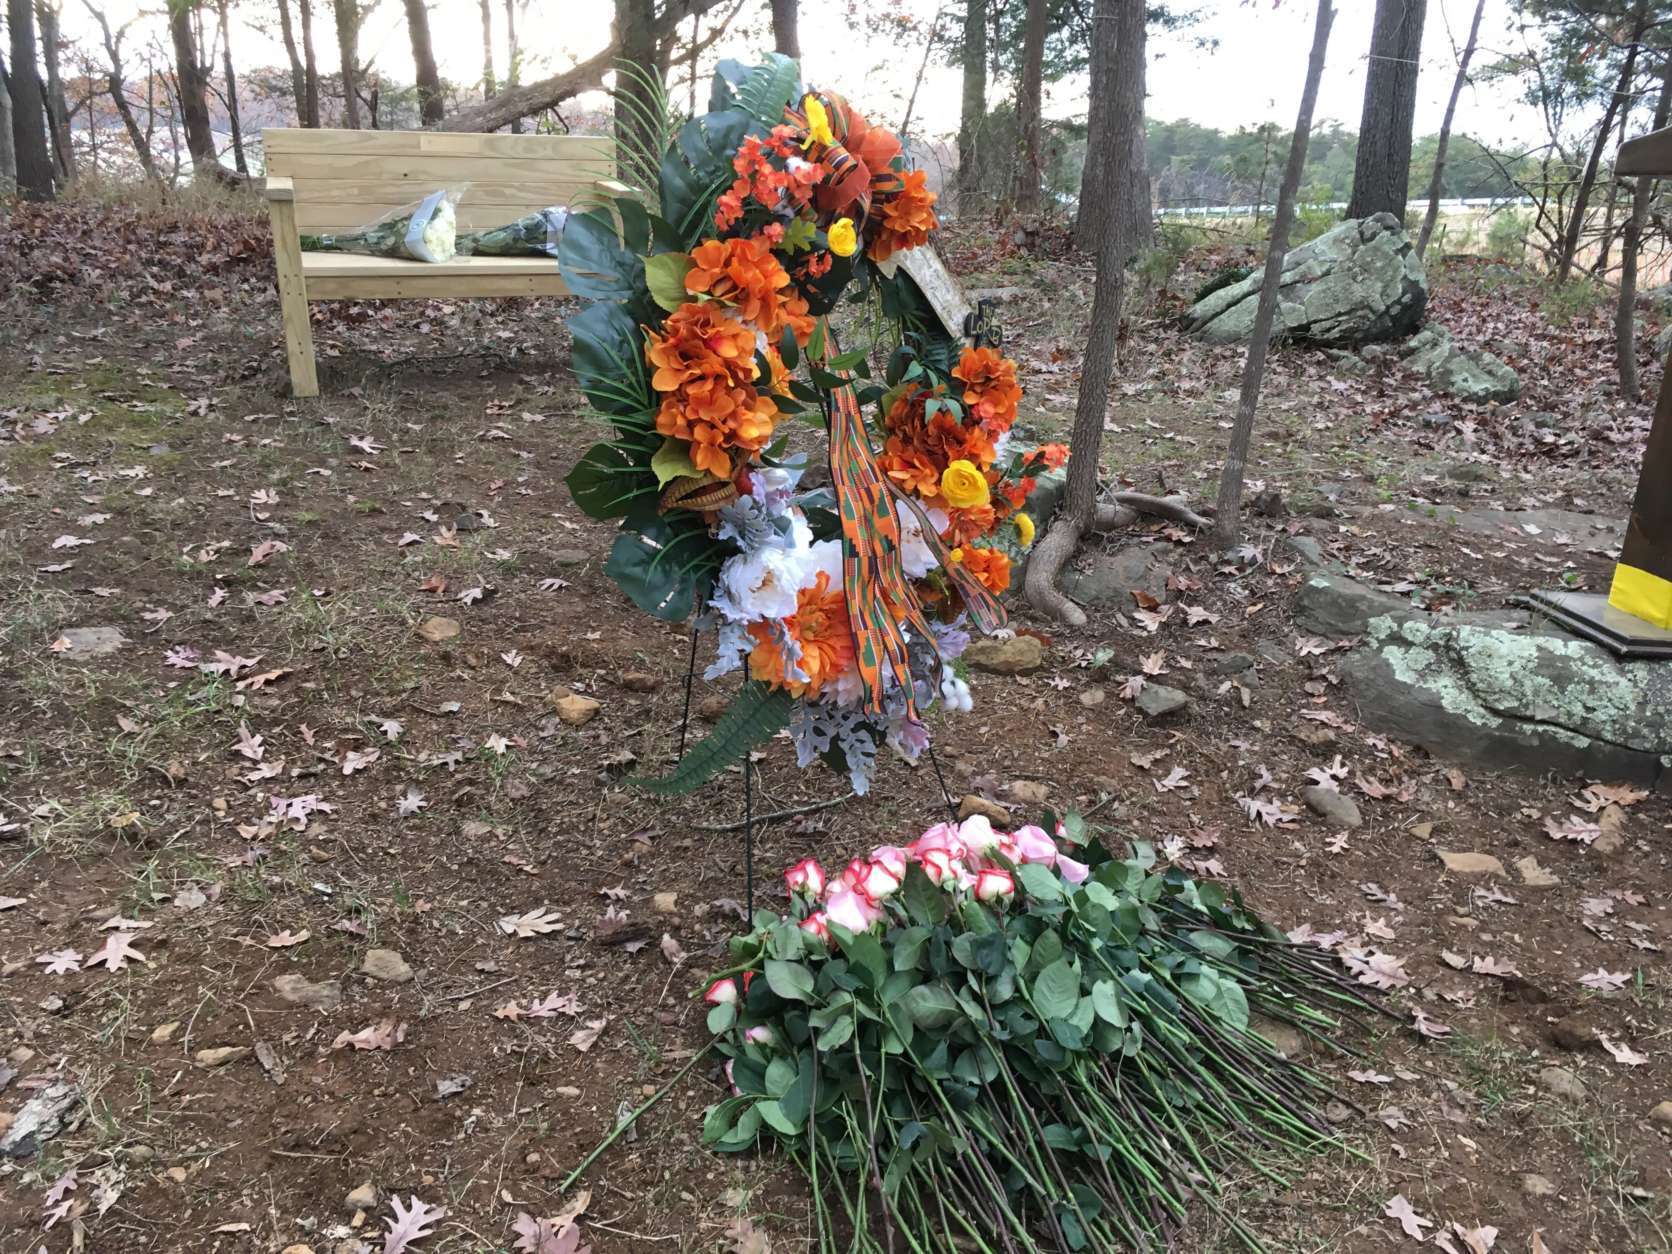 The interred at Belmont Slave Cemetery were honored with songs, prayers, a wreath and individual tributes of flowers at Sunday's march and walking tour. (WTOP/Liz Anderson)